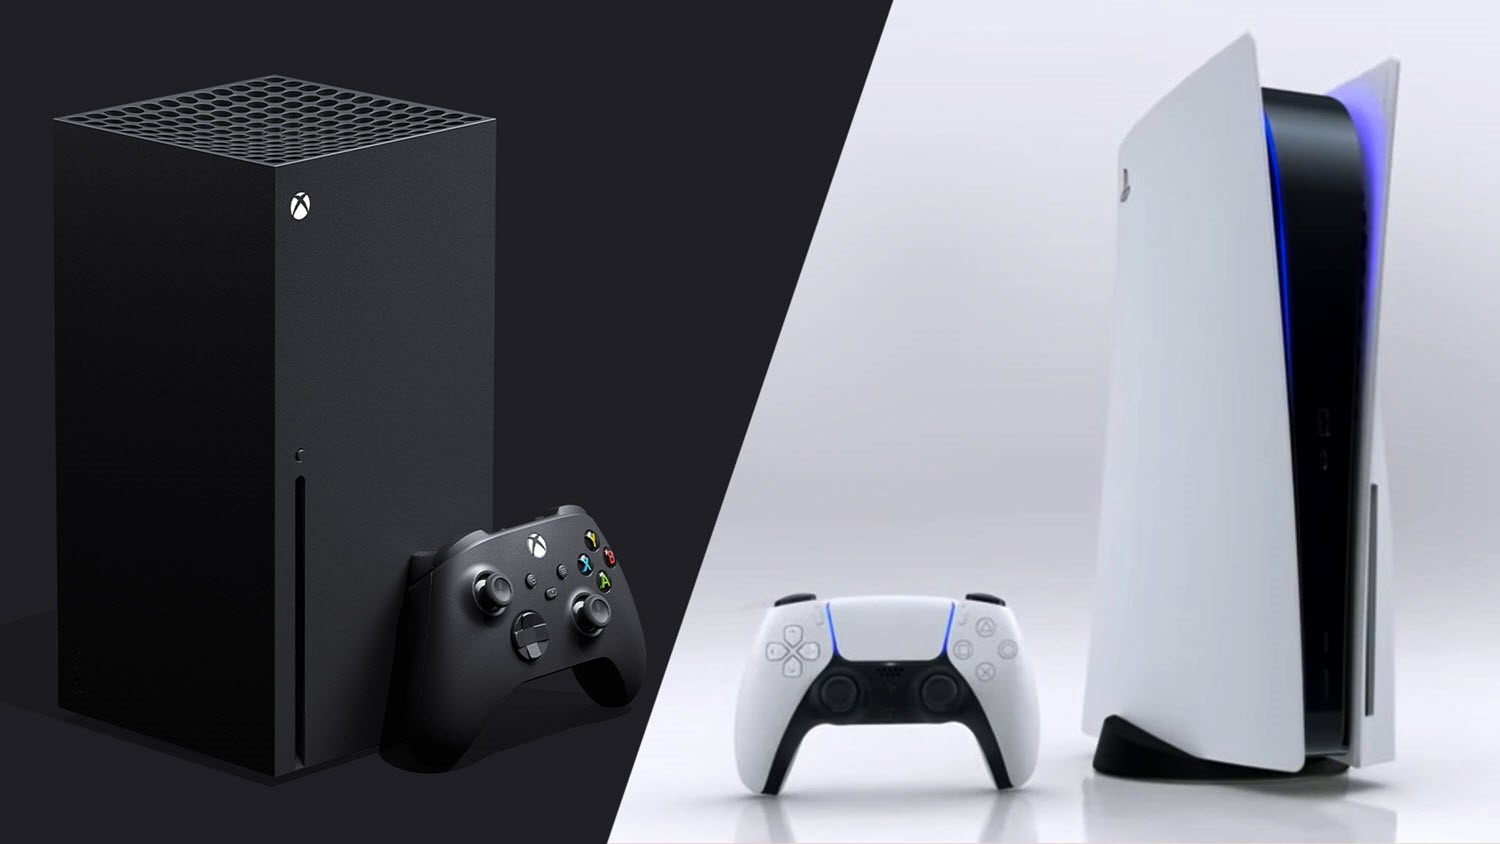 Which is the strongest "PlayStation 5" or "Xbox Series X"? 1